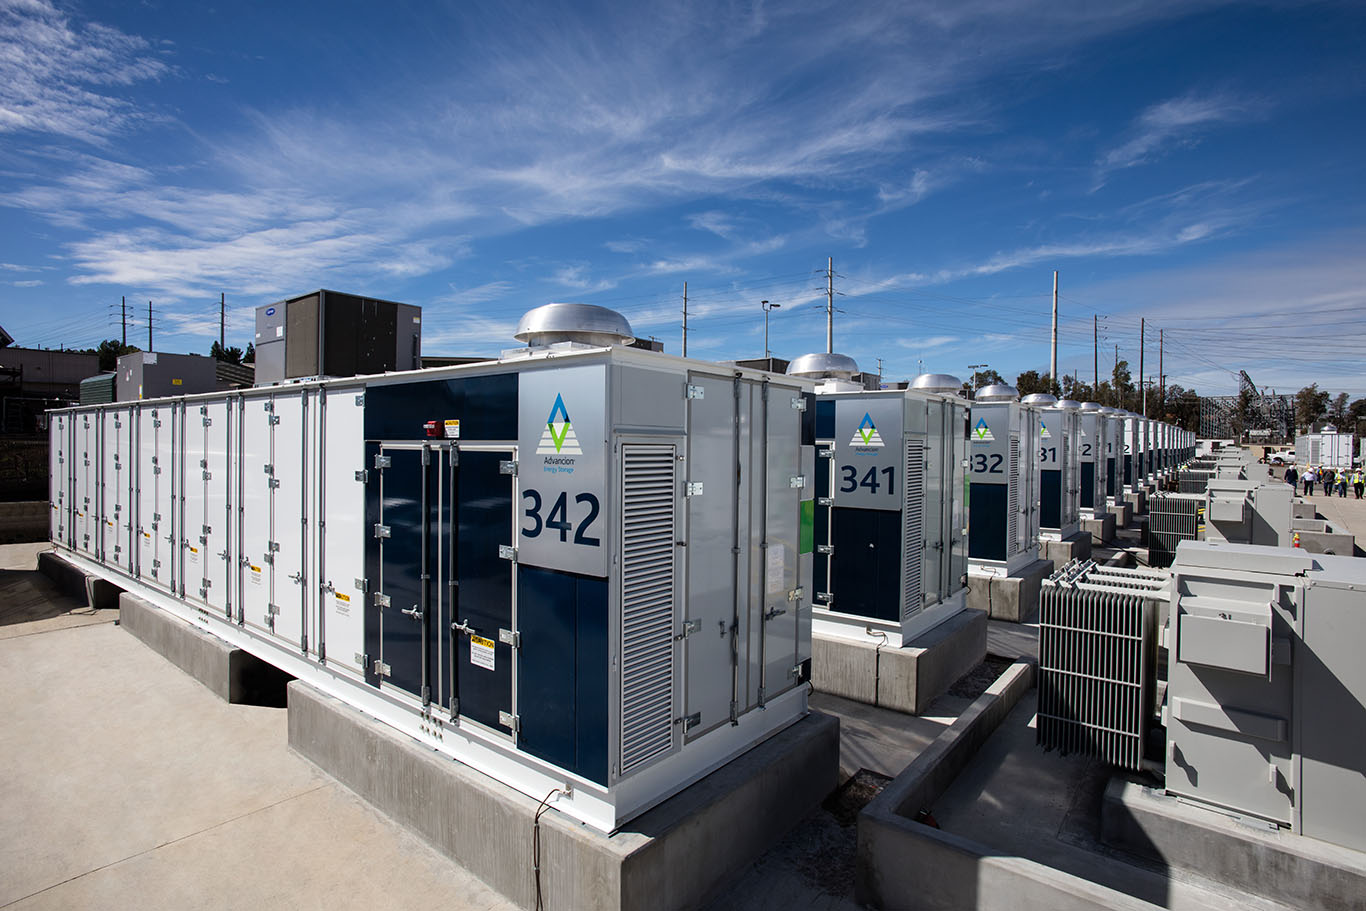 🔋 2019 Top 10 Energy Storage Battery Projects 🔋